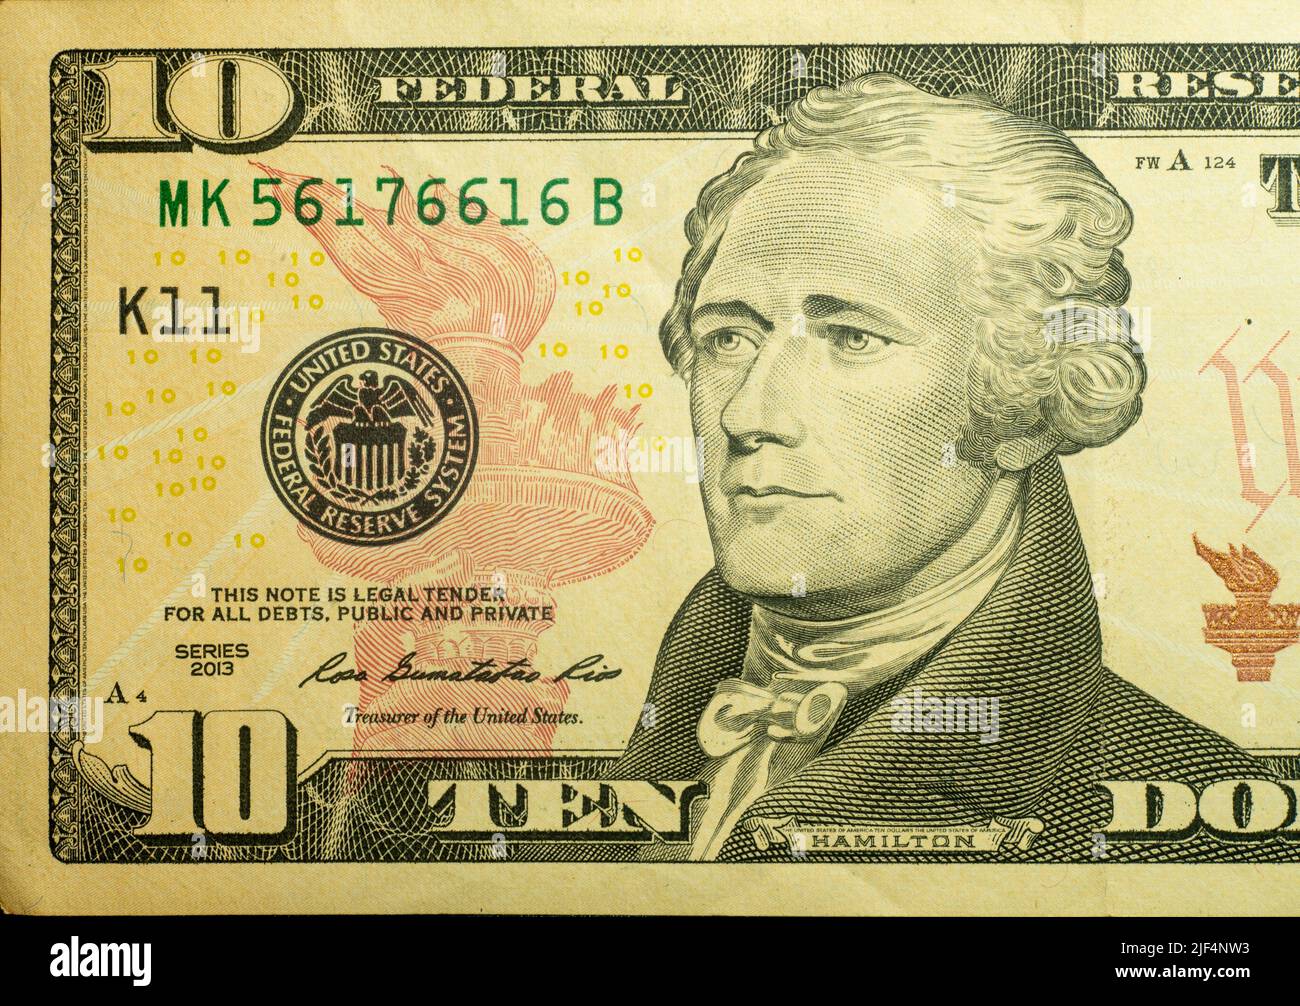 Don't demote Alexander Hamilton on $10 bill: Our view